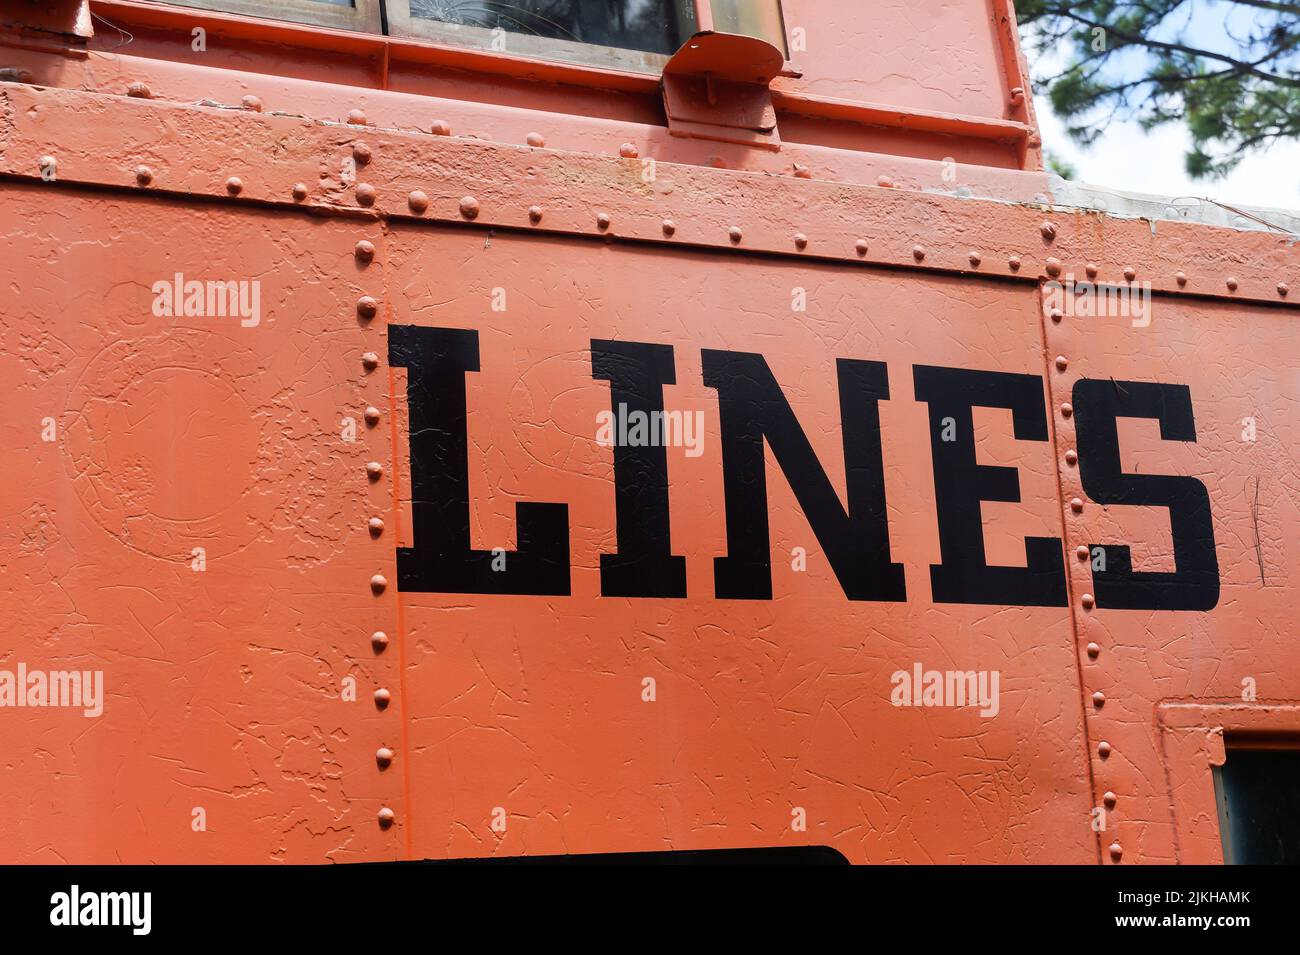 A closeup shot of the word 'LINES' painted in black on an orange metal surface Stock Photo